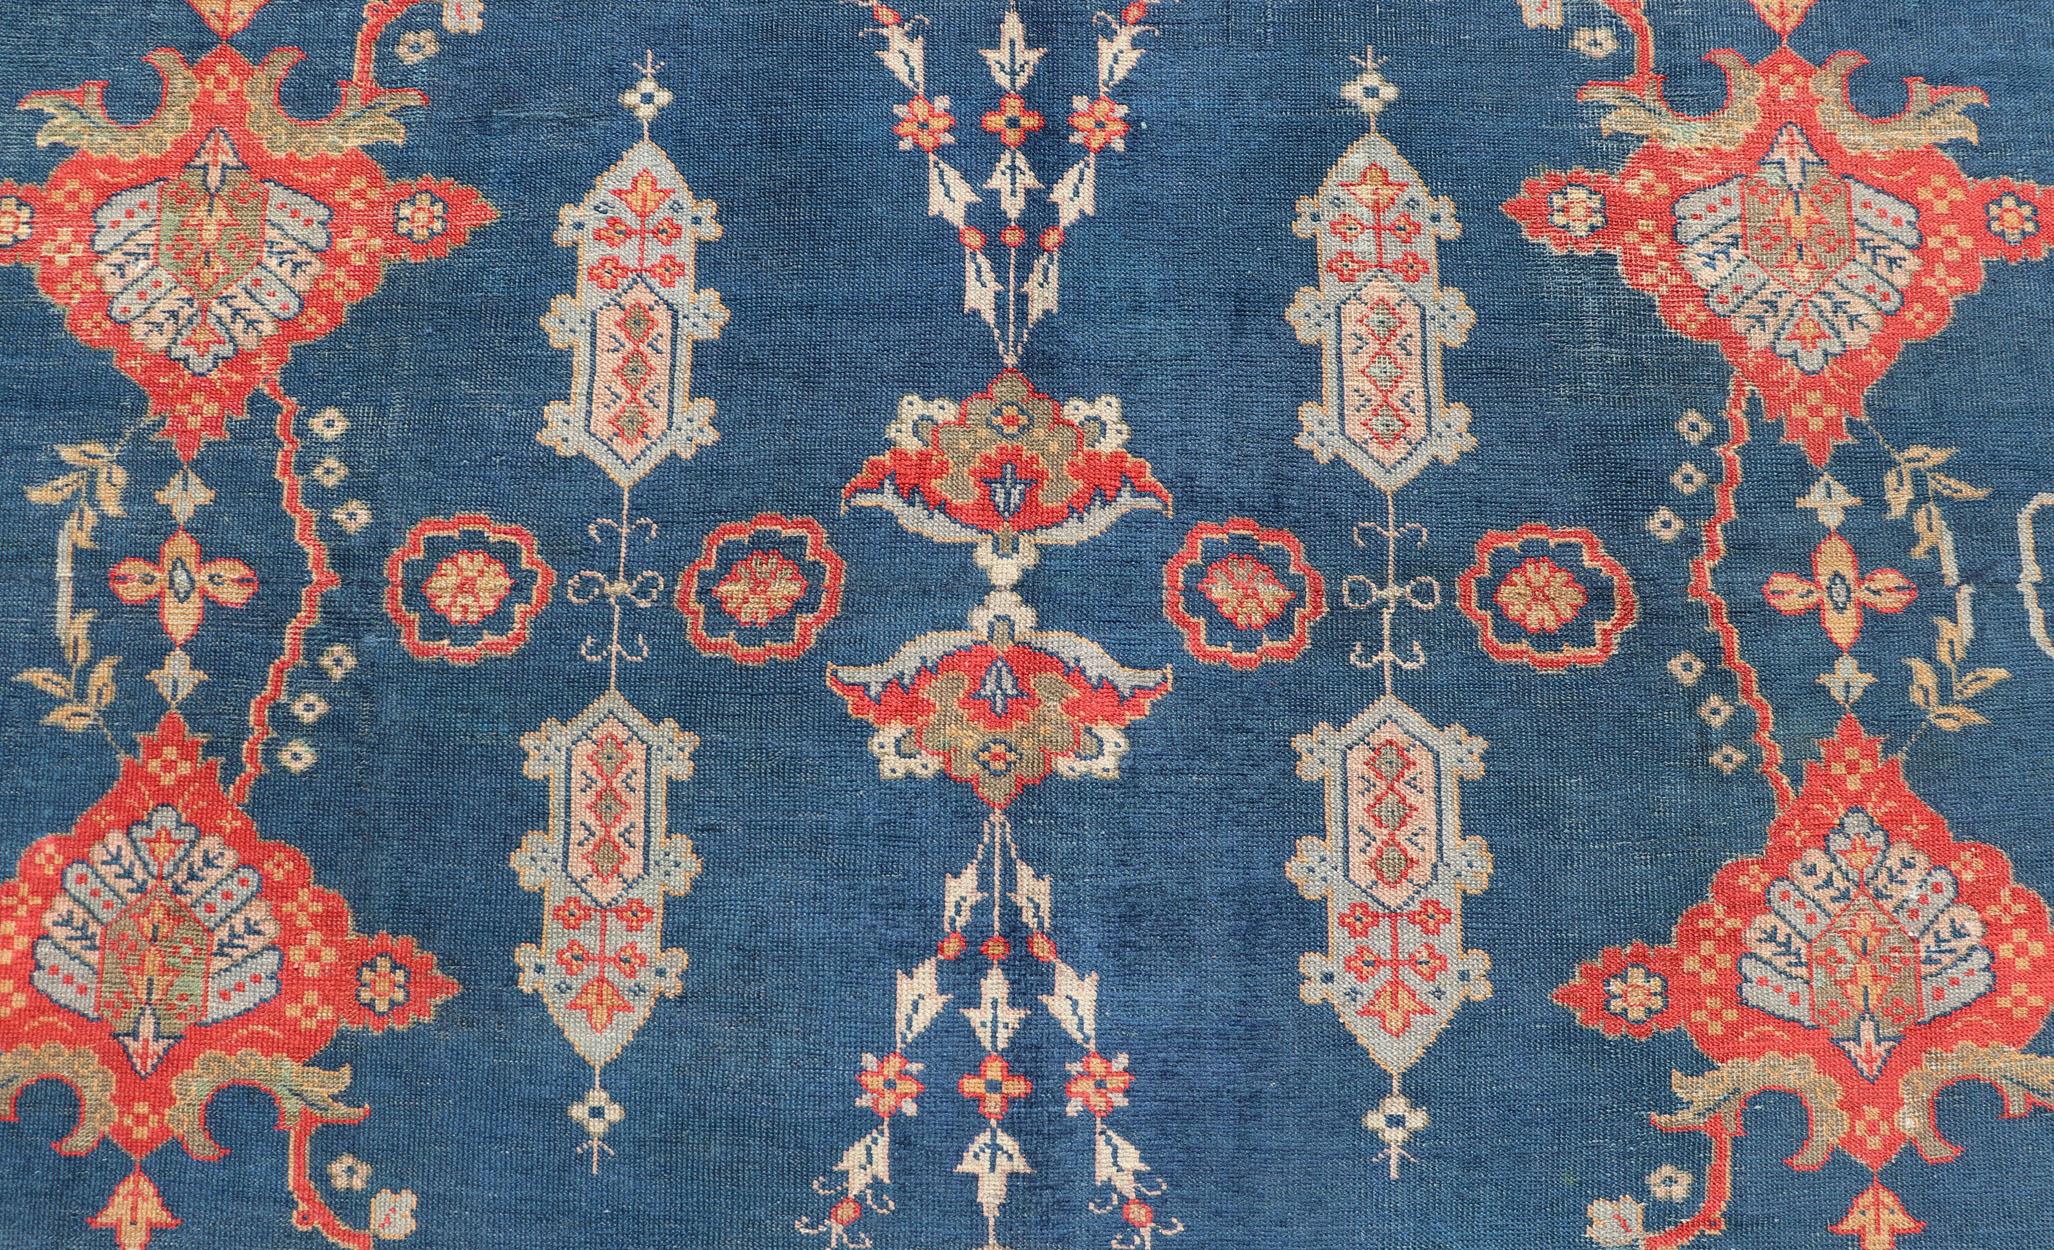 Large Antique Turkish Oushak Rug in Blue and Red with Ornate Medallion Design For Sale 4